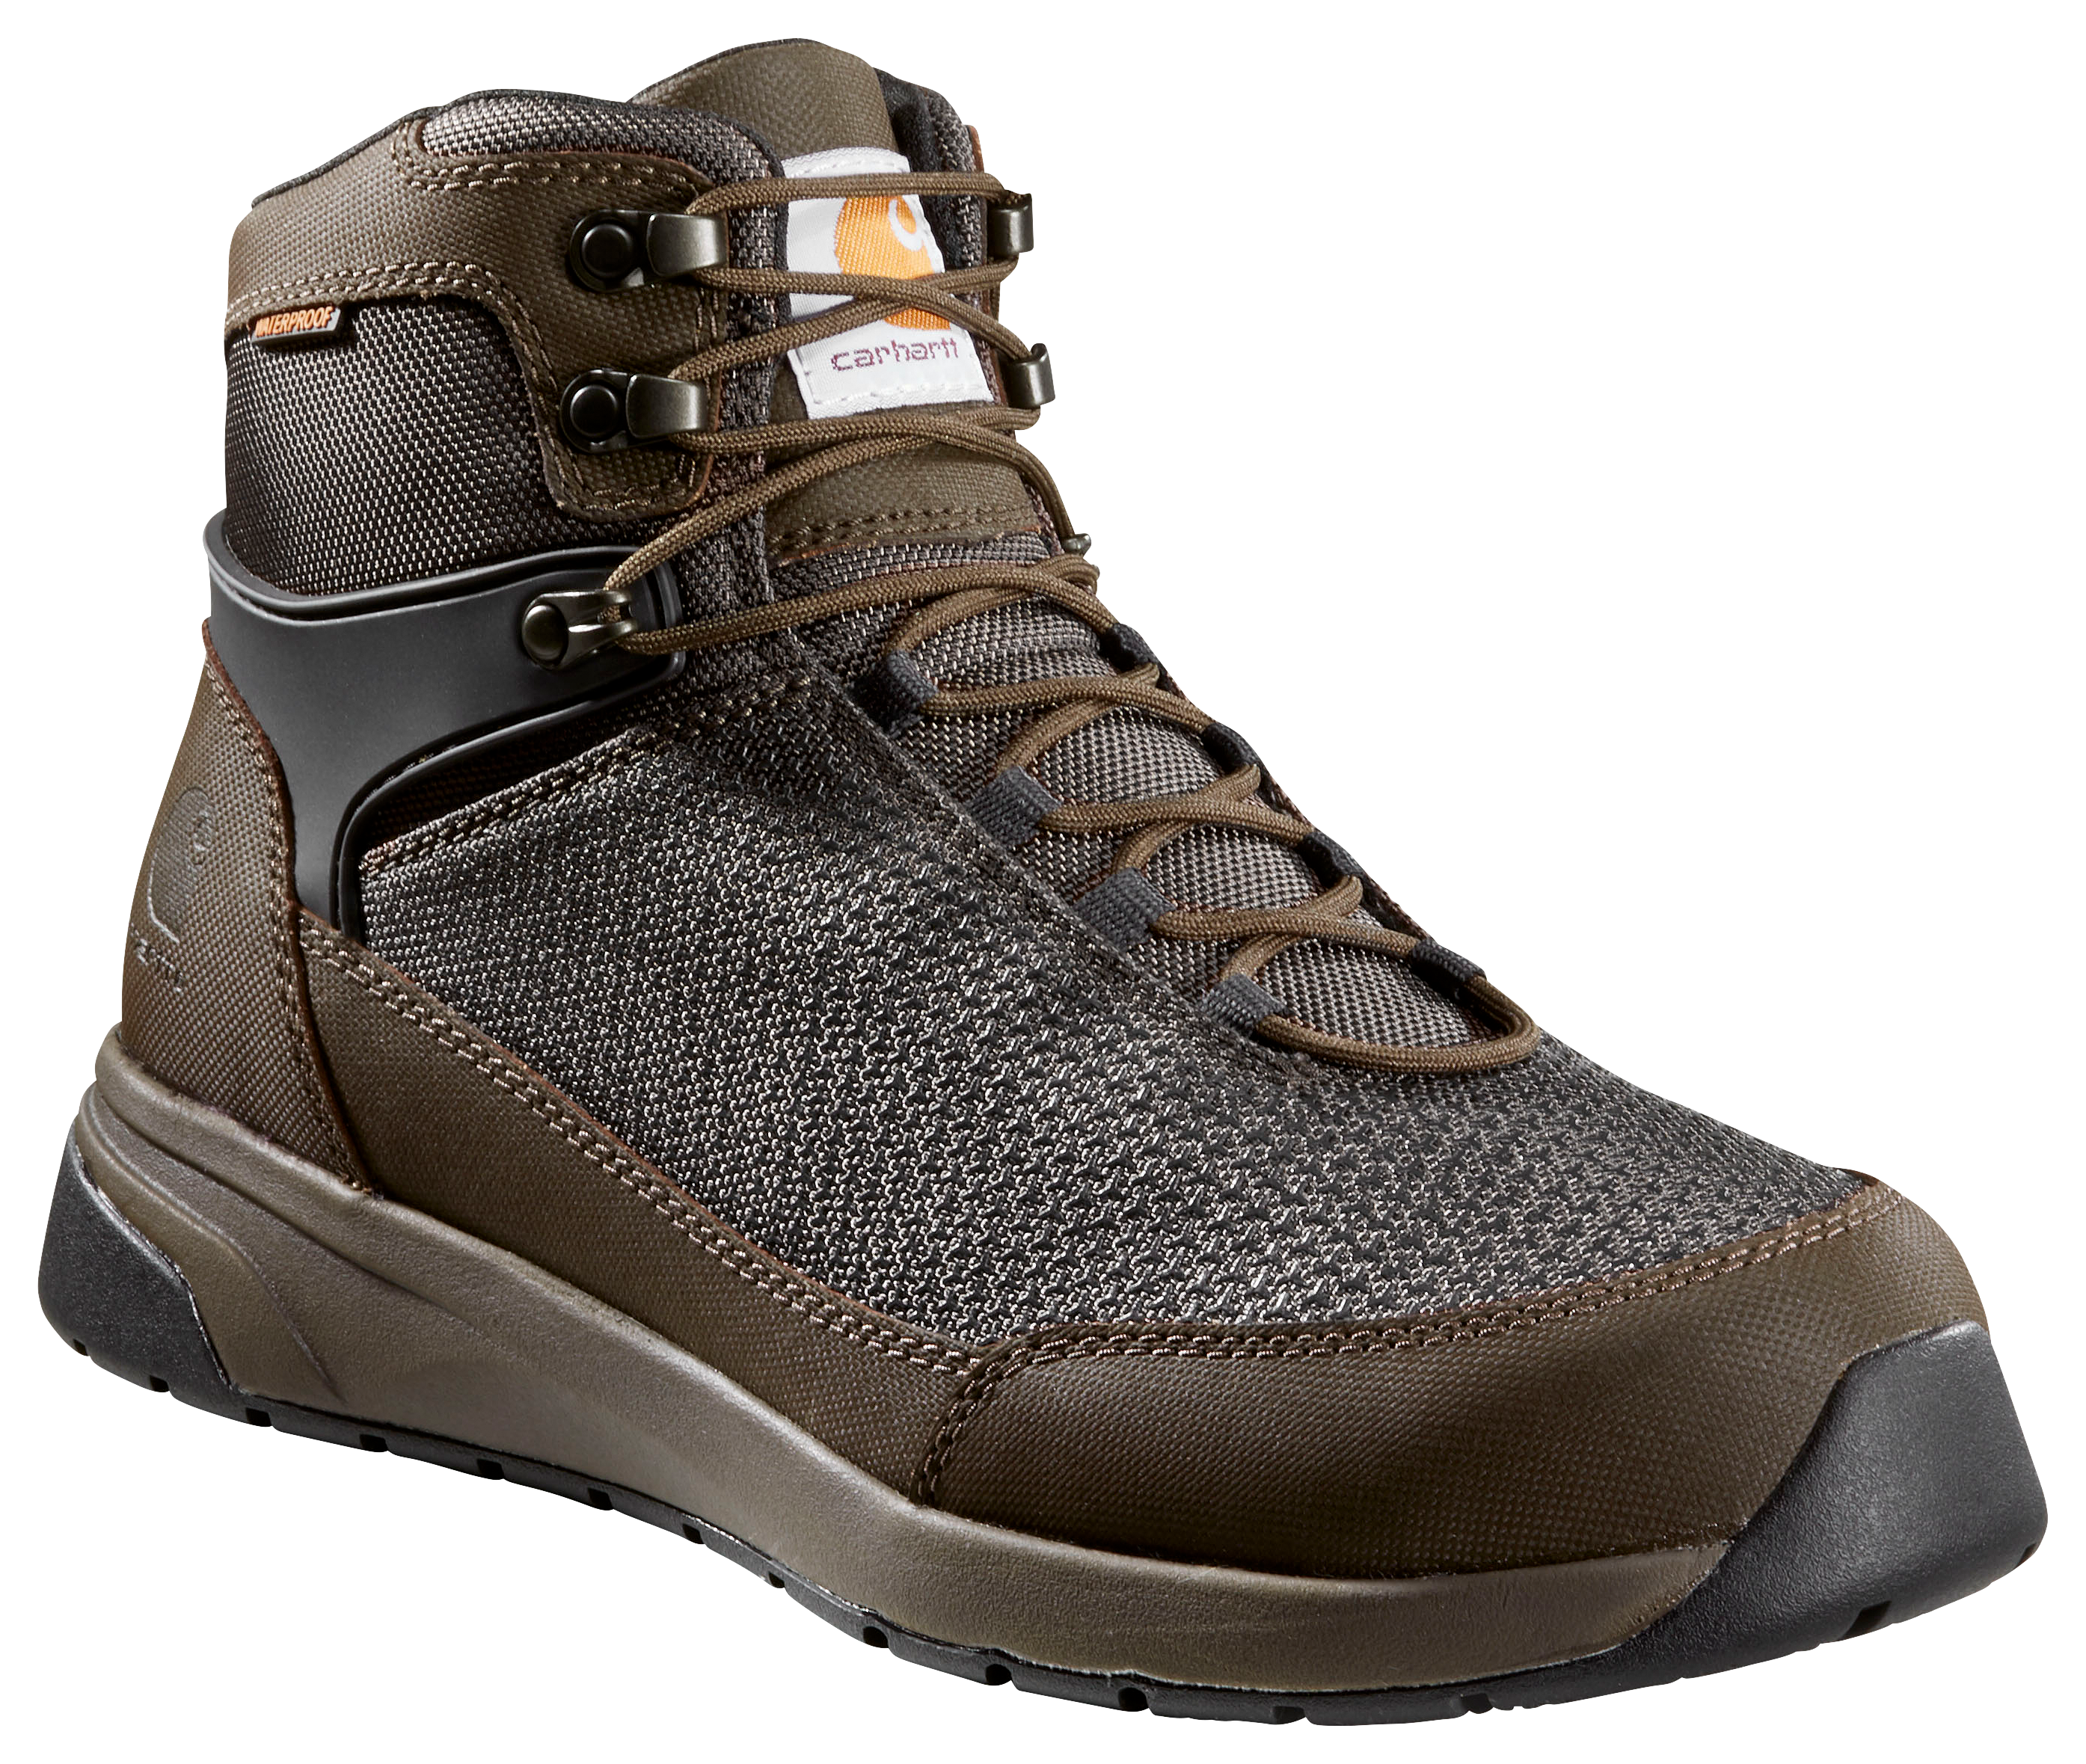 Carhartt Force 6"" Nano Composite-Toe Work Boots for Men